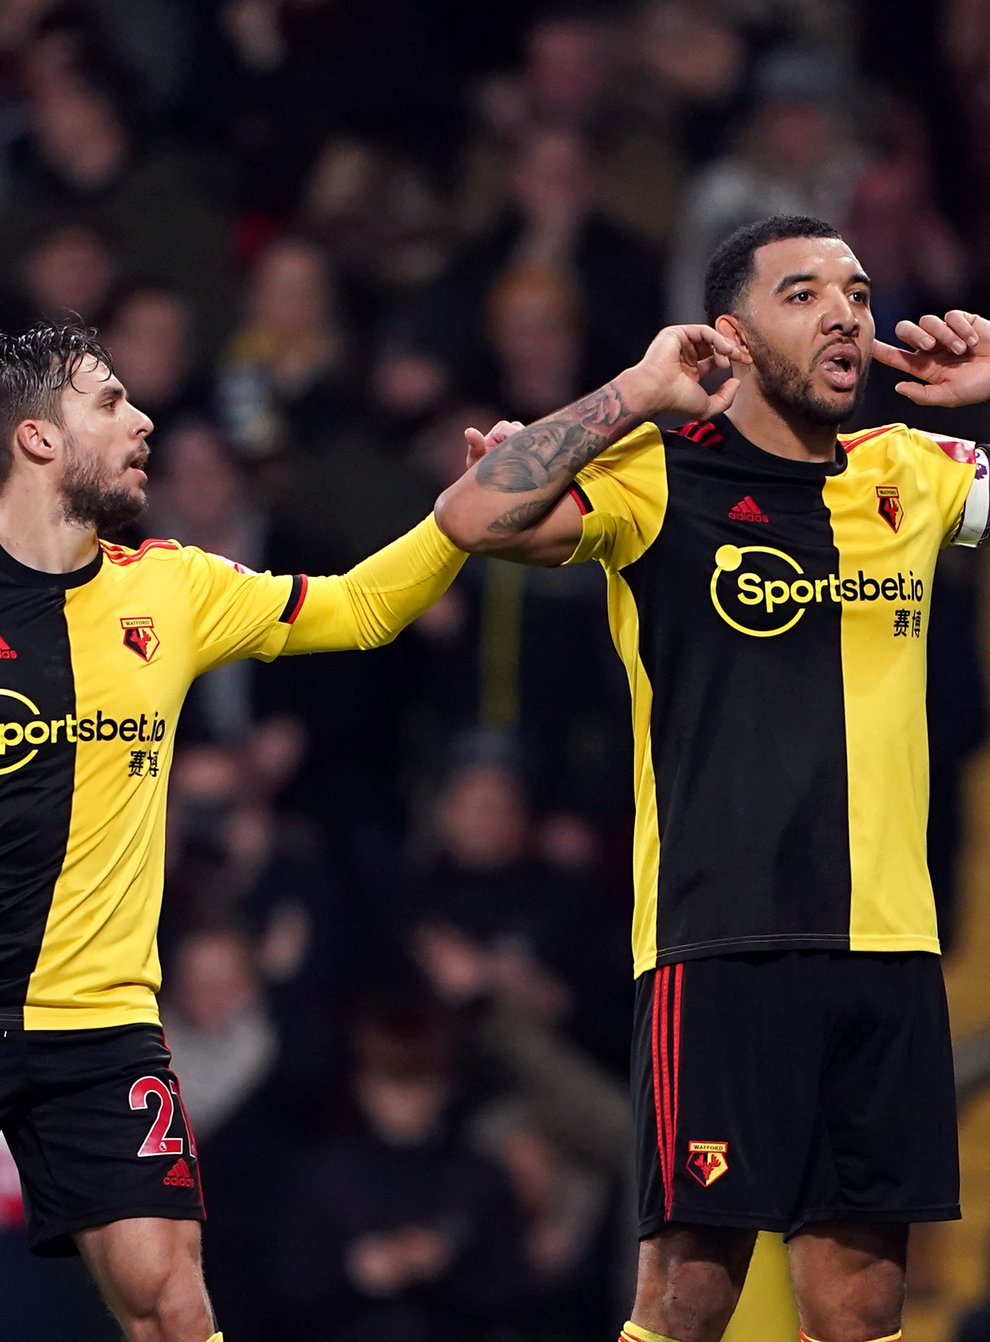 Deeney has so far refused to return to club training due to fears about the safety of his son and BAME players